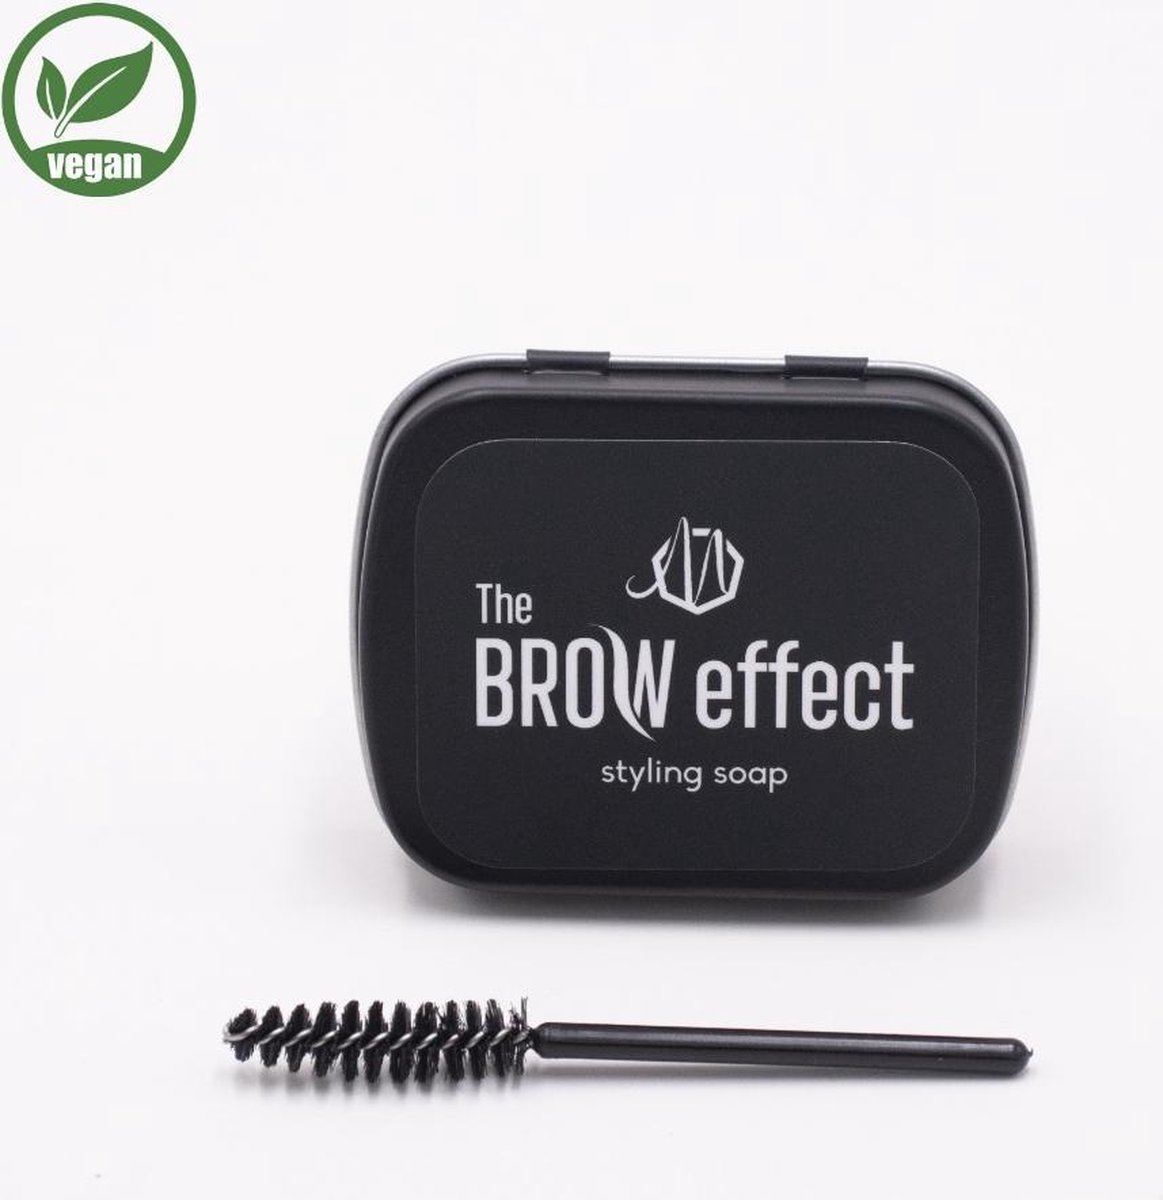 The Brow Effect styling soap - Wenkbrauwgel - Soap Brow - Brow Soap - Waterproof - Brow Gel - Browsoap - Soapbrow - Instagram Brows - The brow effect